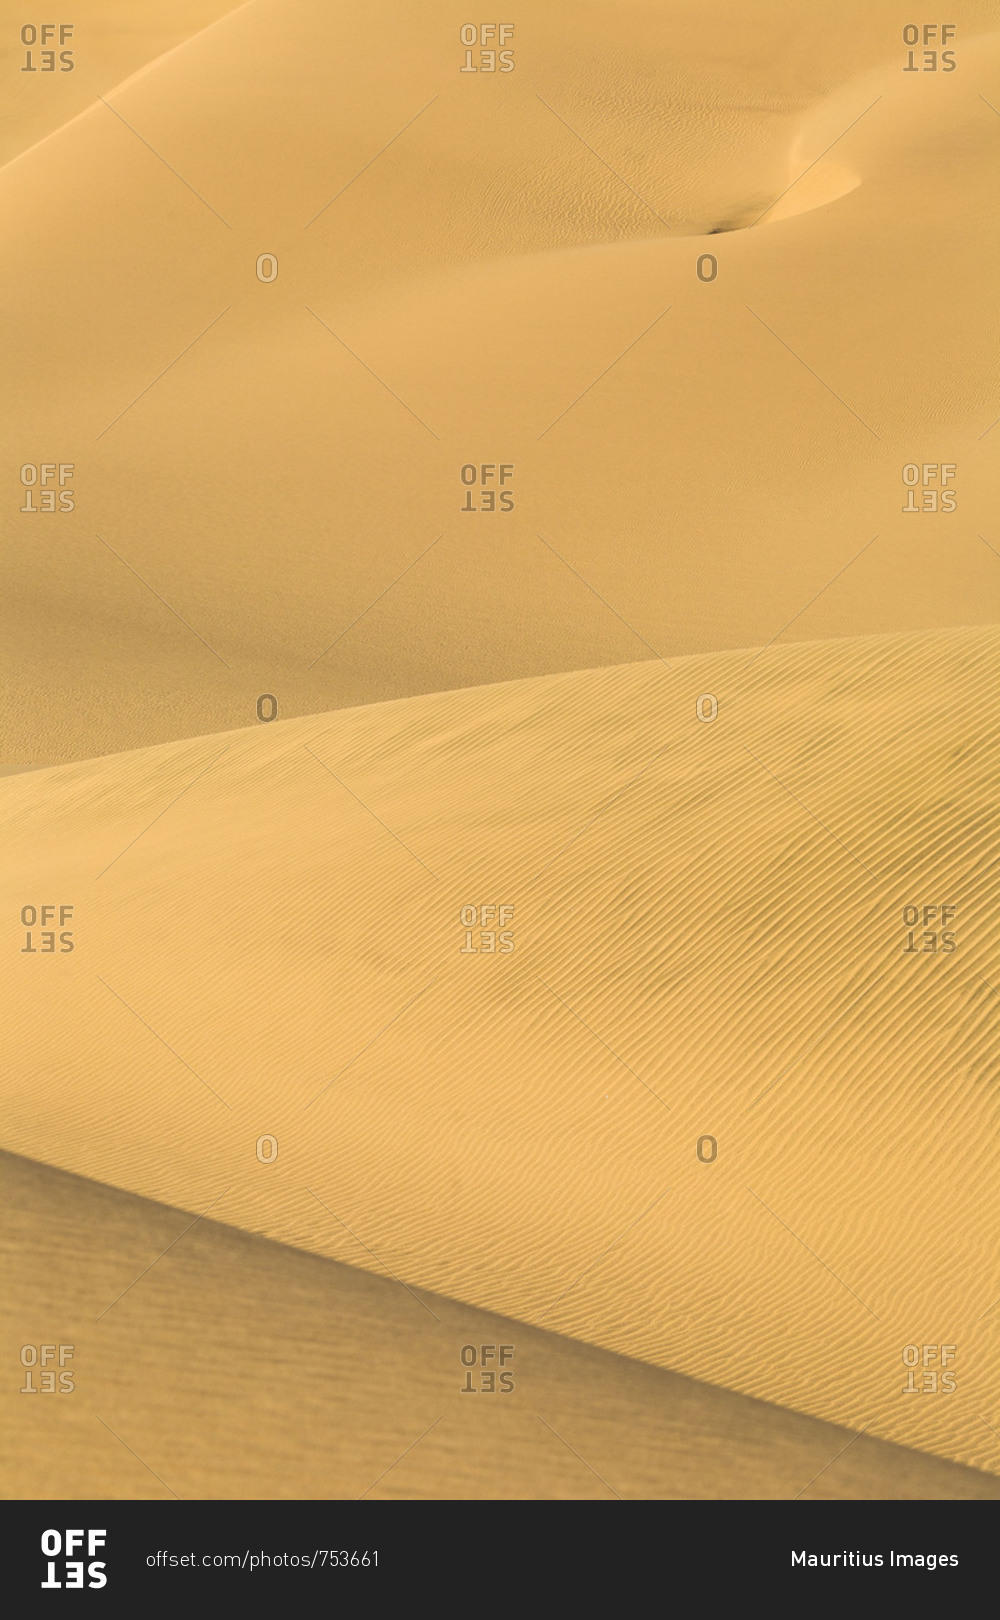 Details and shapes of the sand dunes modeled by wind Walvis Bay Namib Desert Erongo Region Namibia Southern Africa